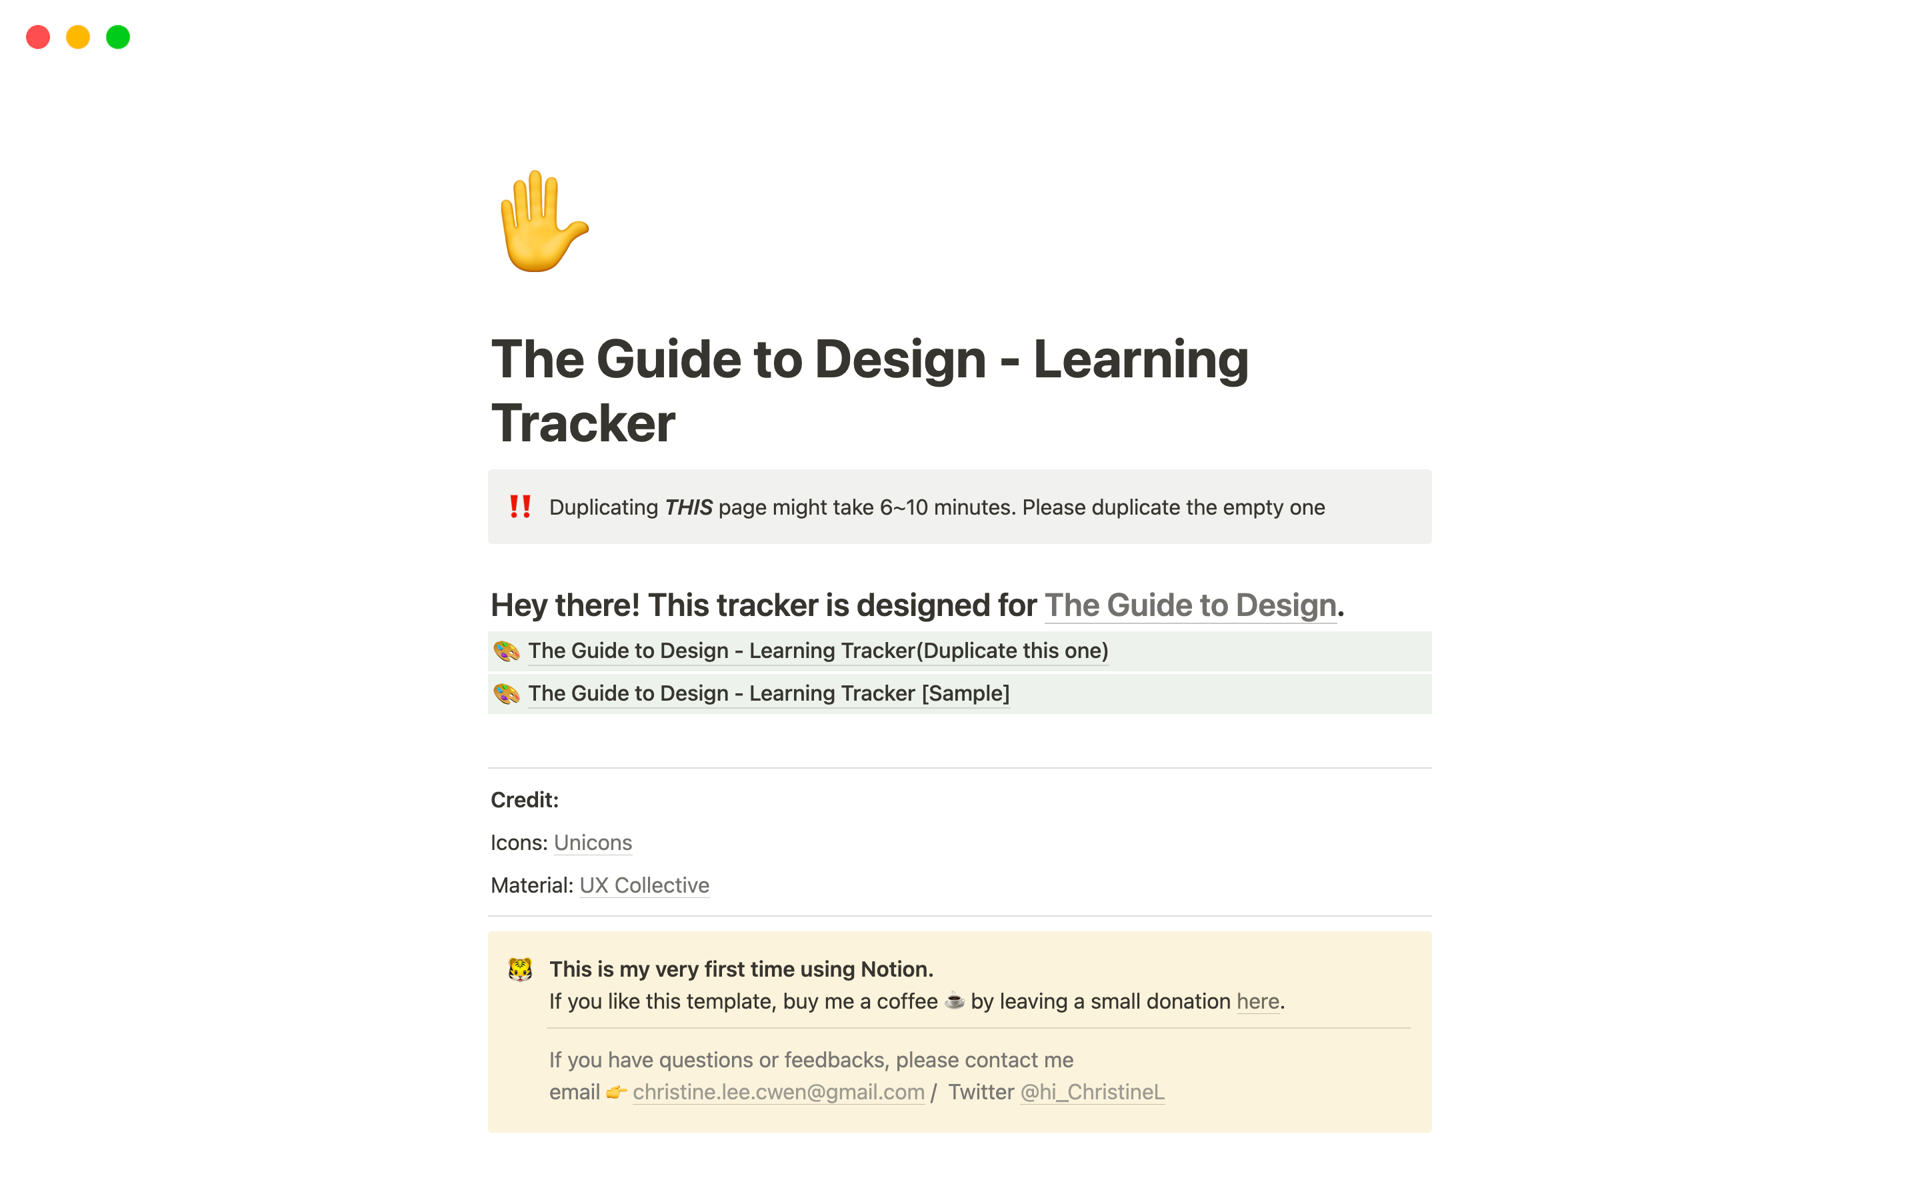 This is a template for tracking self-paced and self-directed learning progress through "the Guide to Design" by UX Collective, including reading, watching, practice, and tasks, with features such as visual progress tracking, note-taking, and reflection.